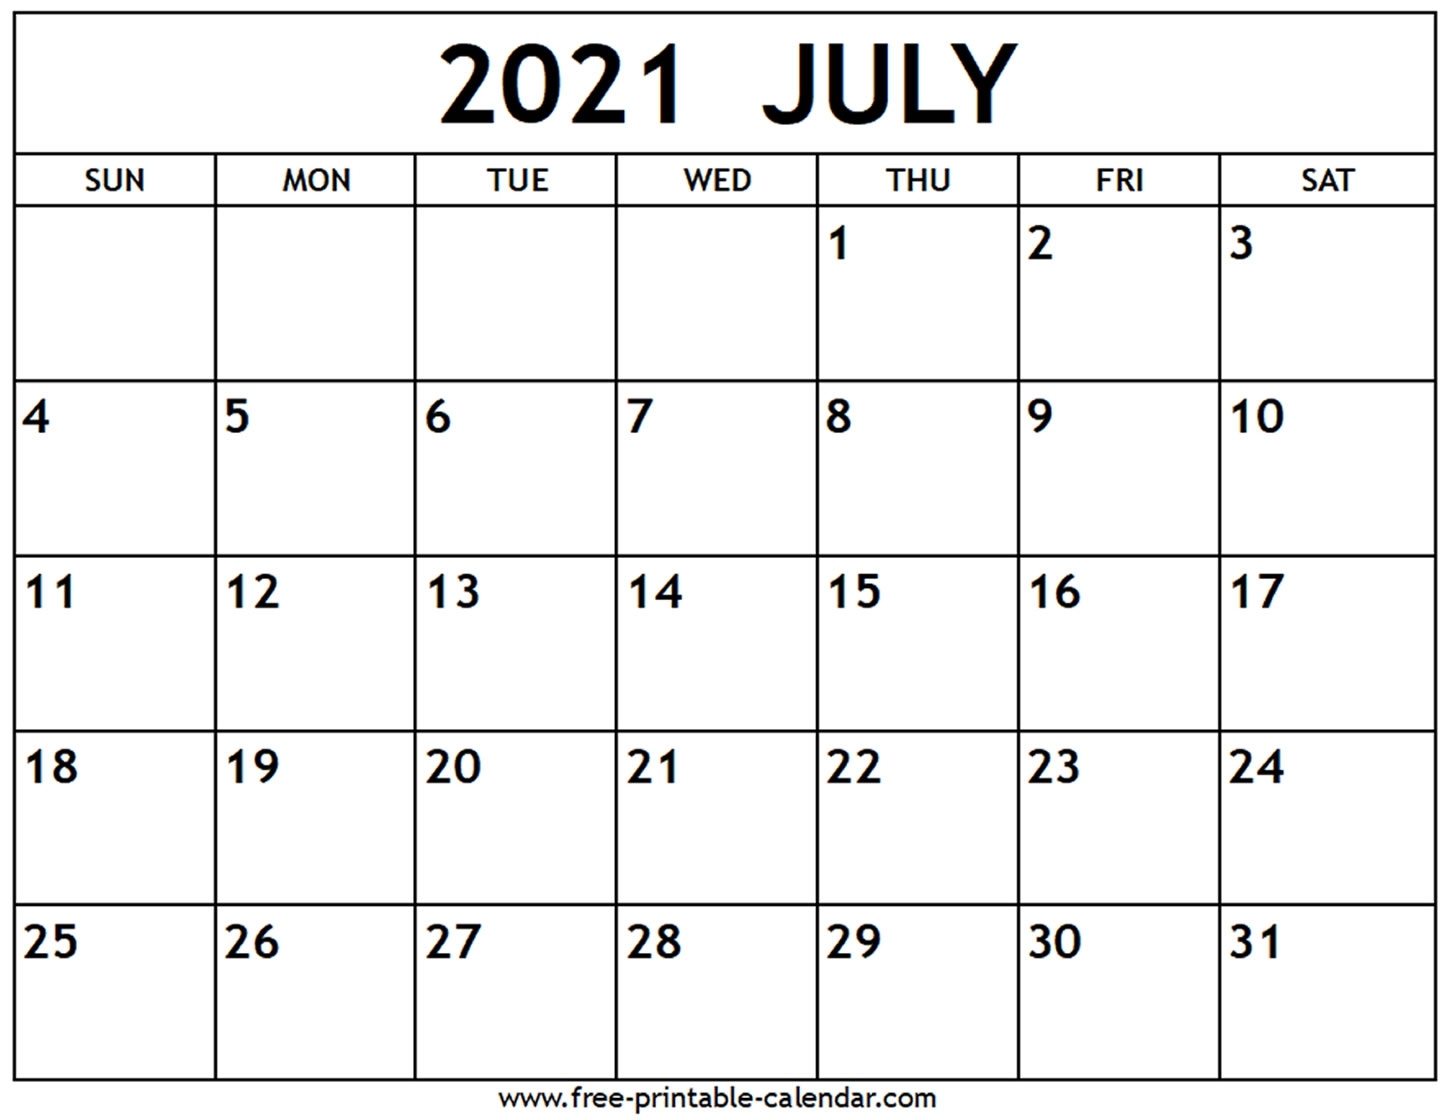 Collect Calendar For June And July 2021